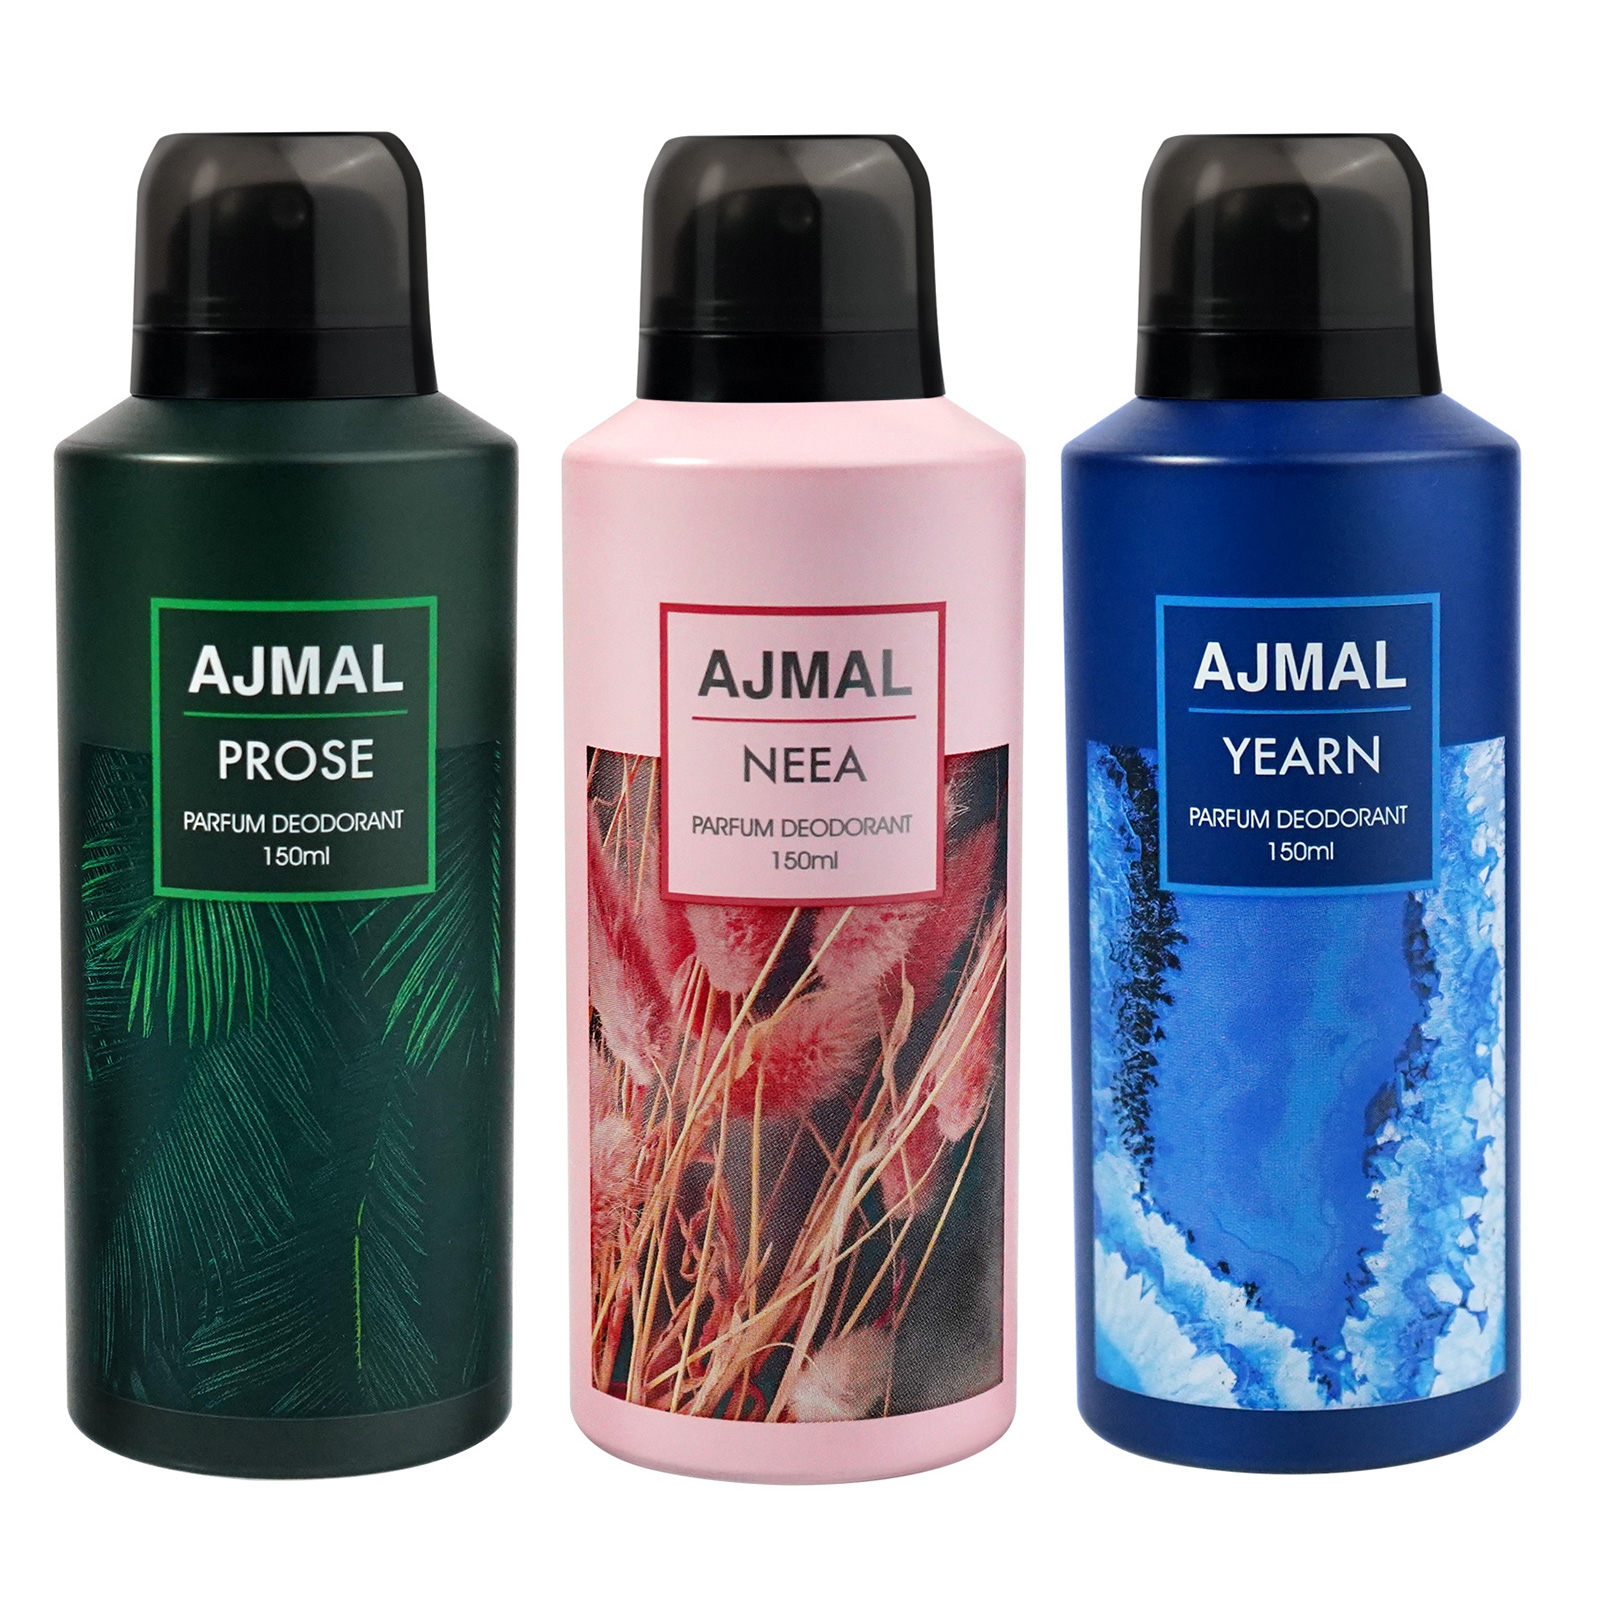 Ajmal Prose, Neea and Yearn Deodorant Perfume 150ML Each Long Lasting Spray Party Wear Gift For Men and Women Online Exclusive